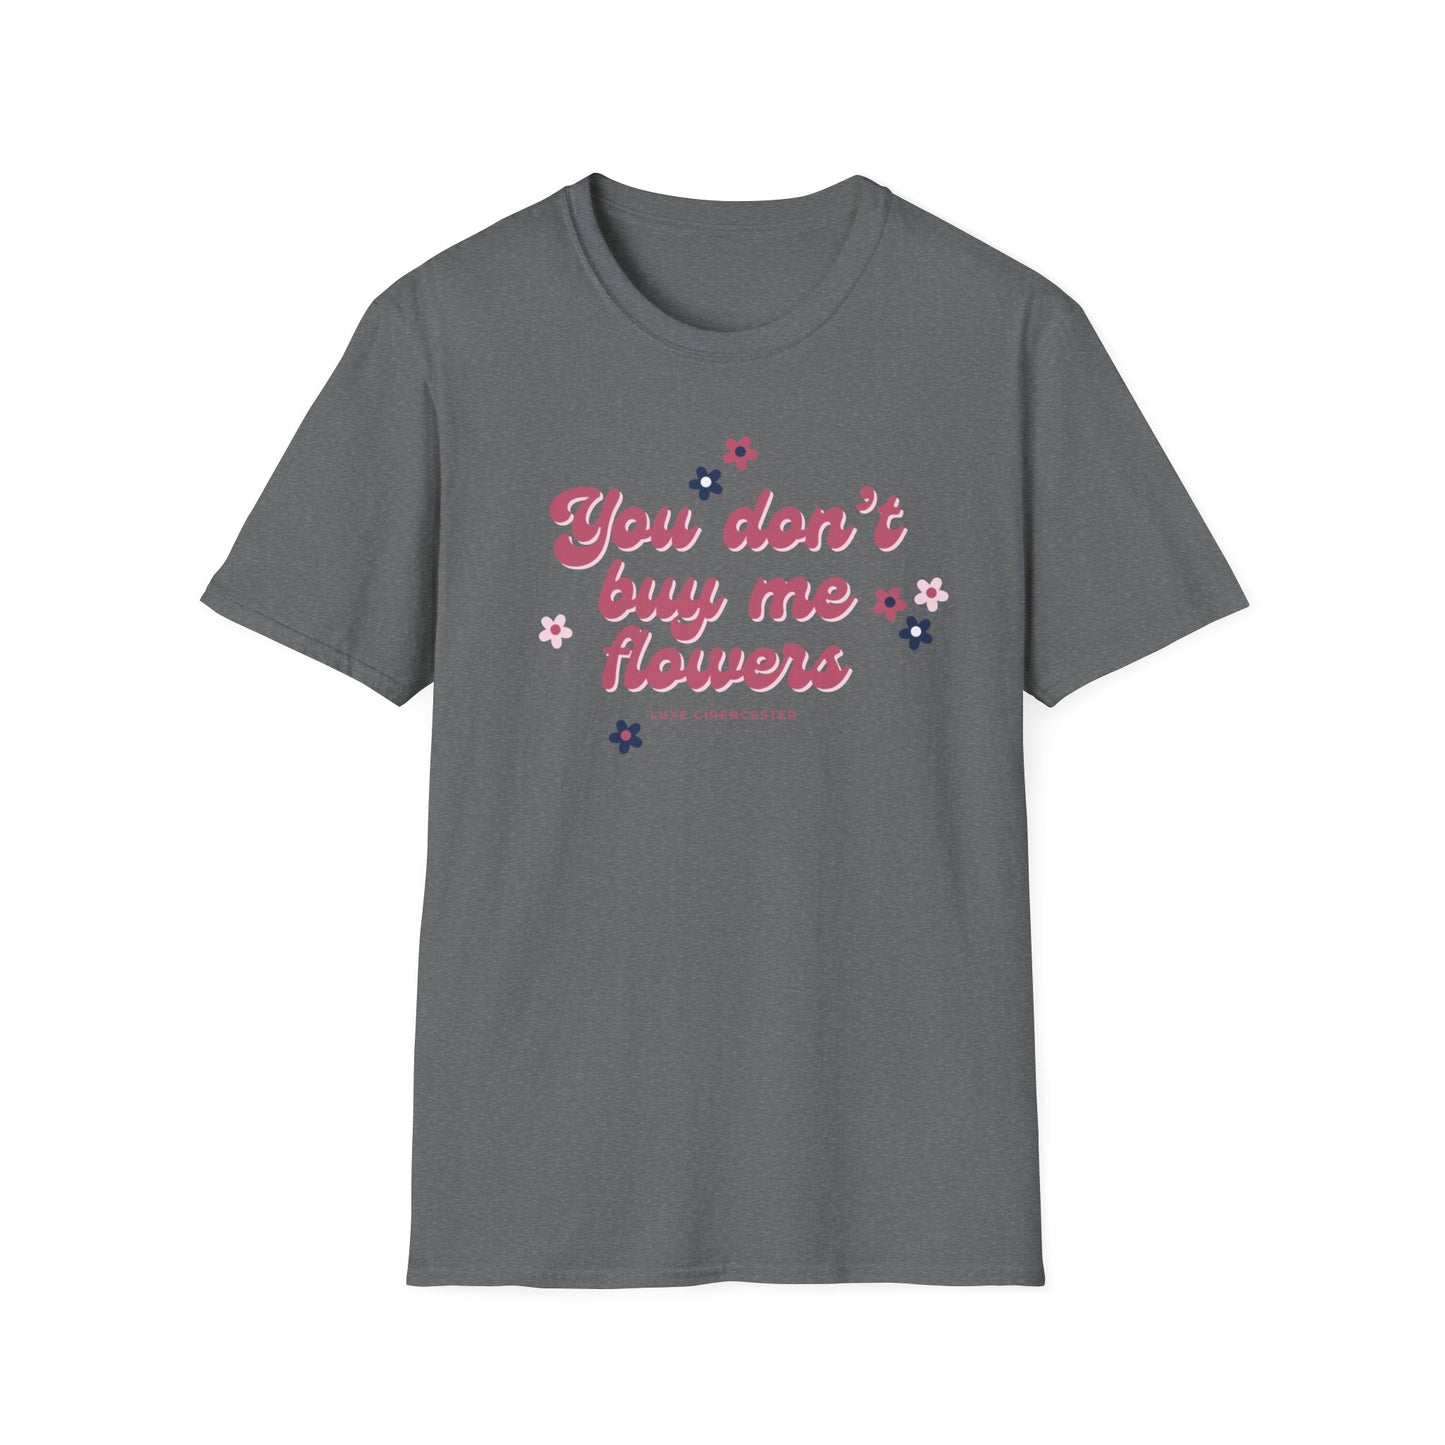 You Don't Buy Me Flowers T-Shirt